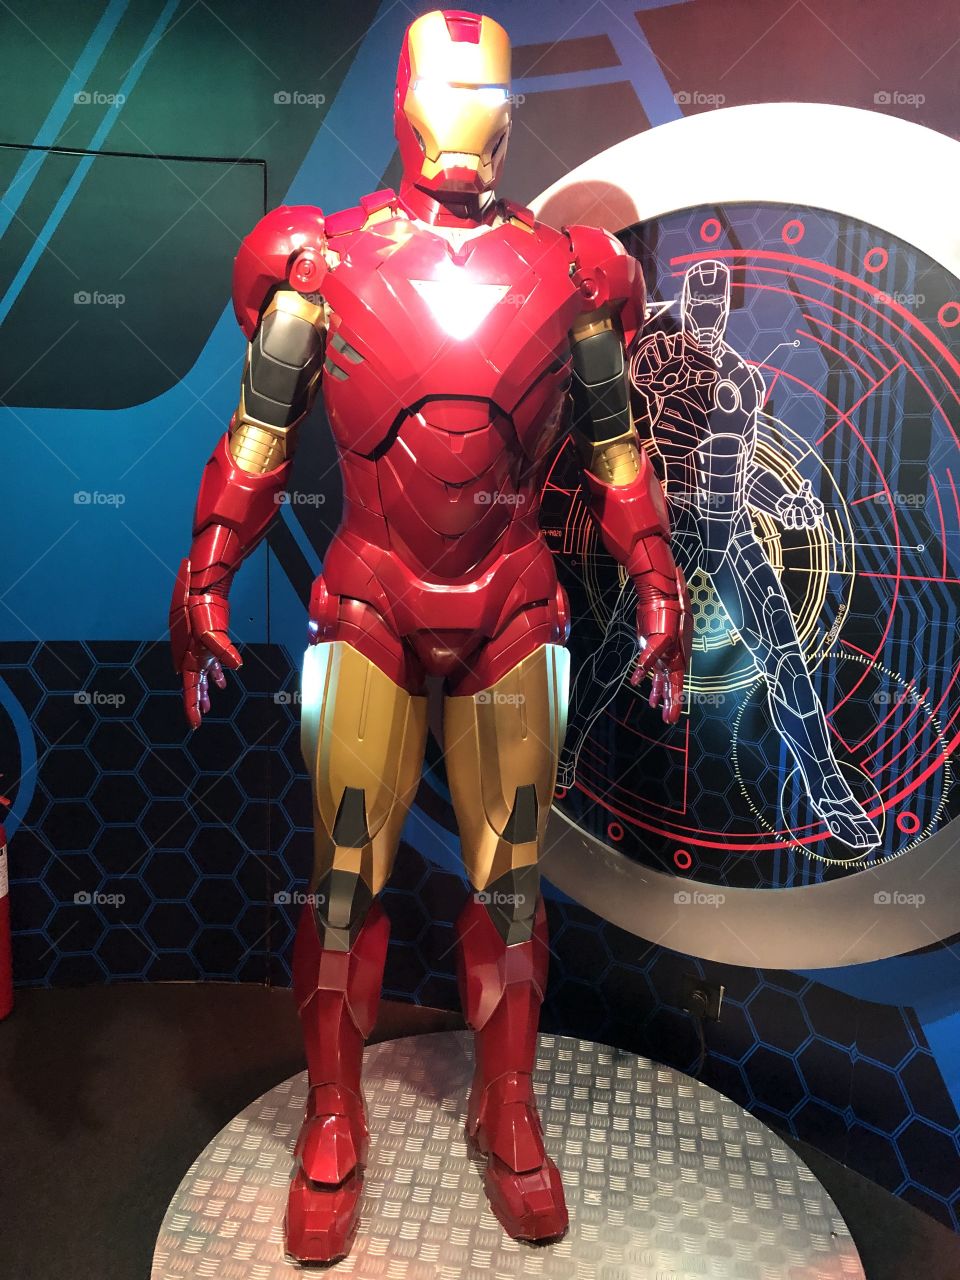 "You can take away my suits, you can take away my home, but there's one thing you can never take away from me: I an Iron Man. 